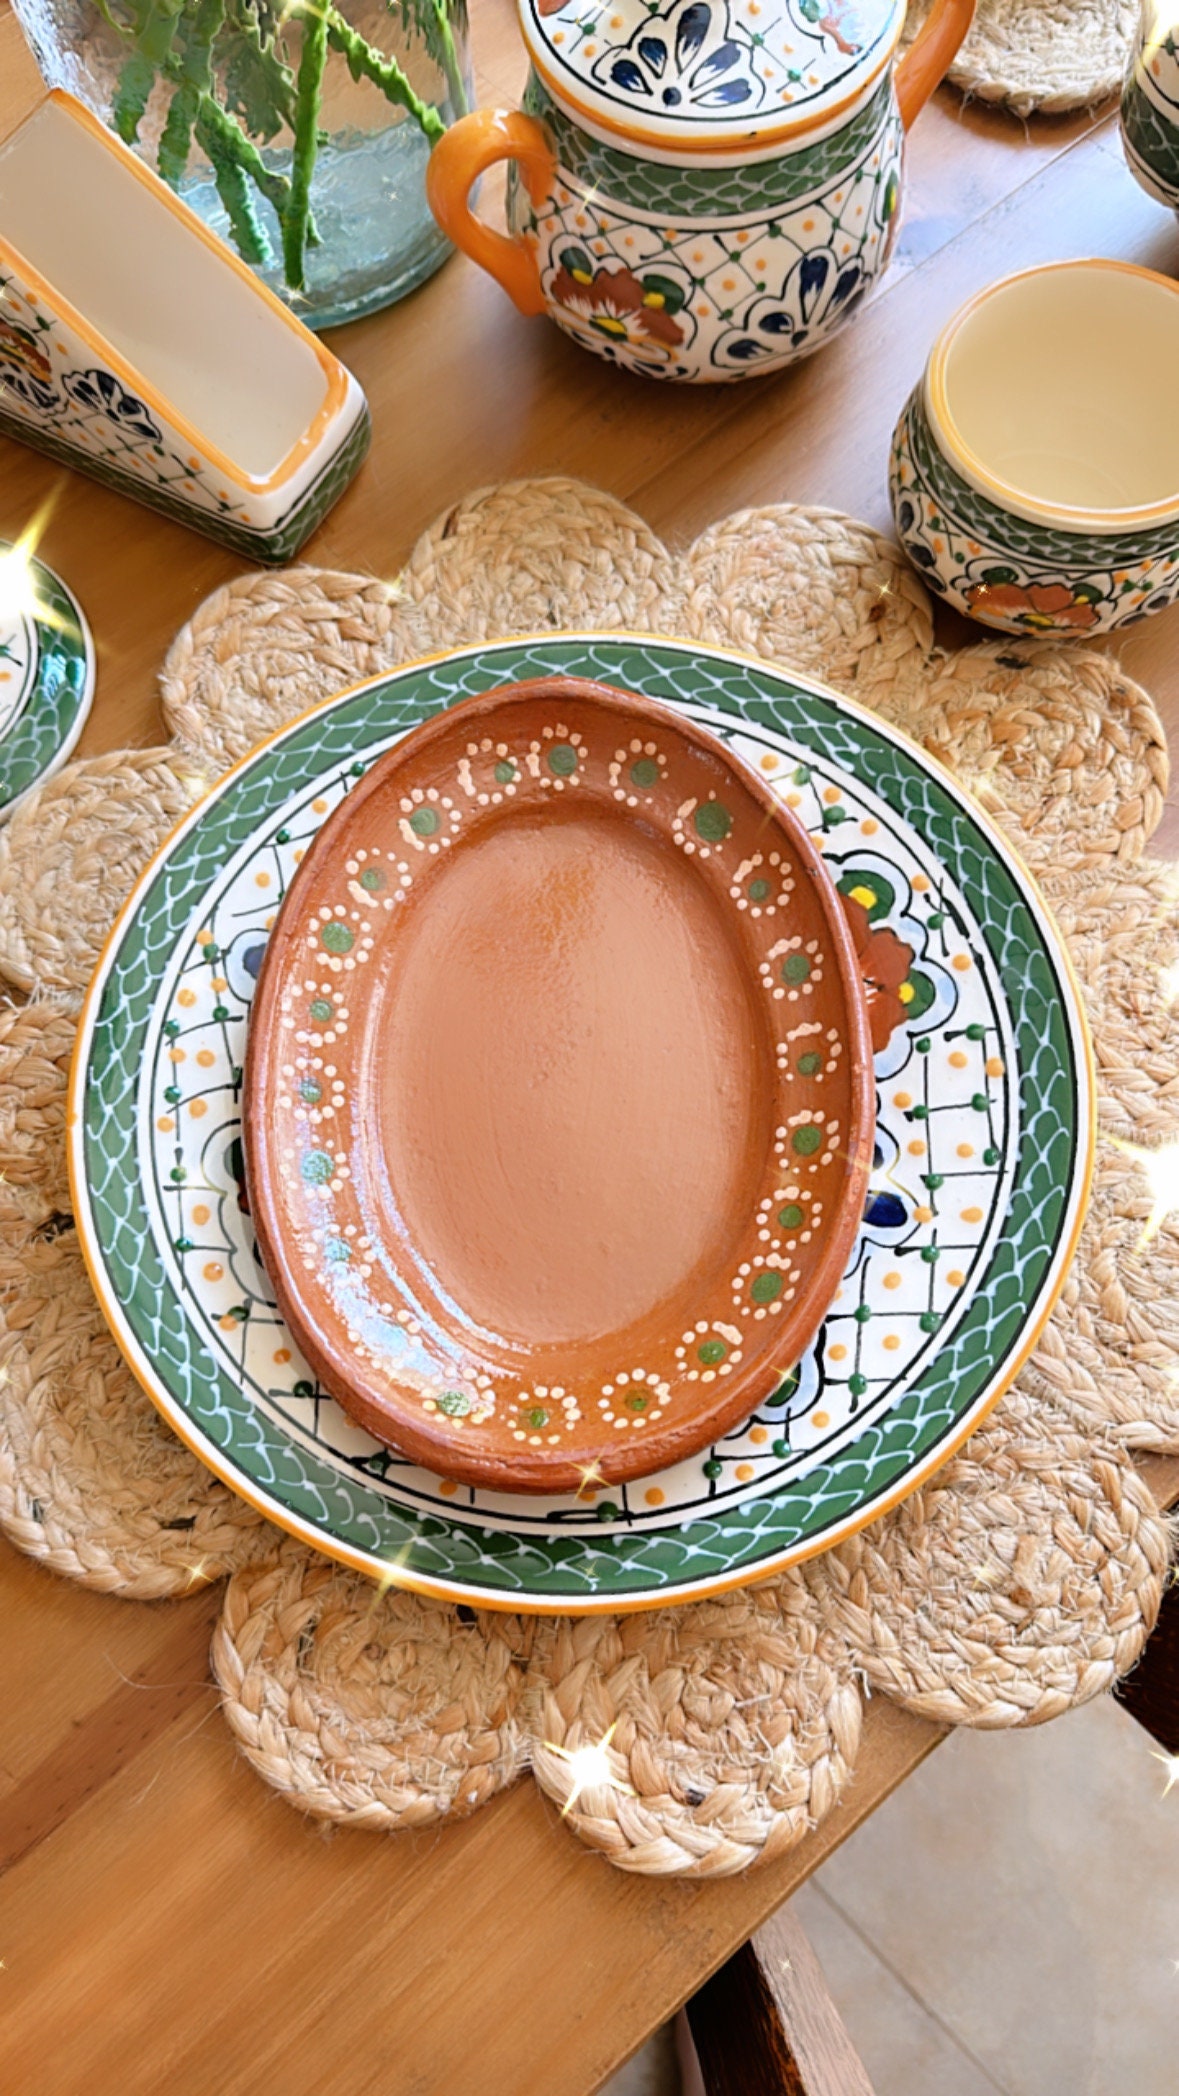 Luksyol Terracotta Oval Oven Tray Set - Handmade Clay Pots for Cooking,  Mexican Indian Dishes, and More! Glazed Cookware with Handles, Pan, and Lid  